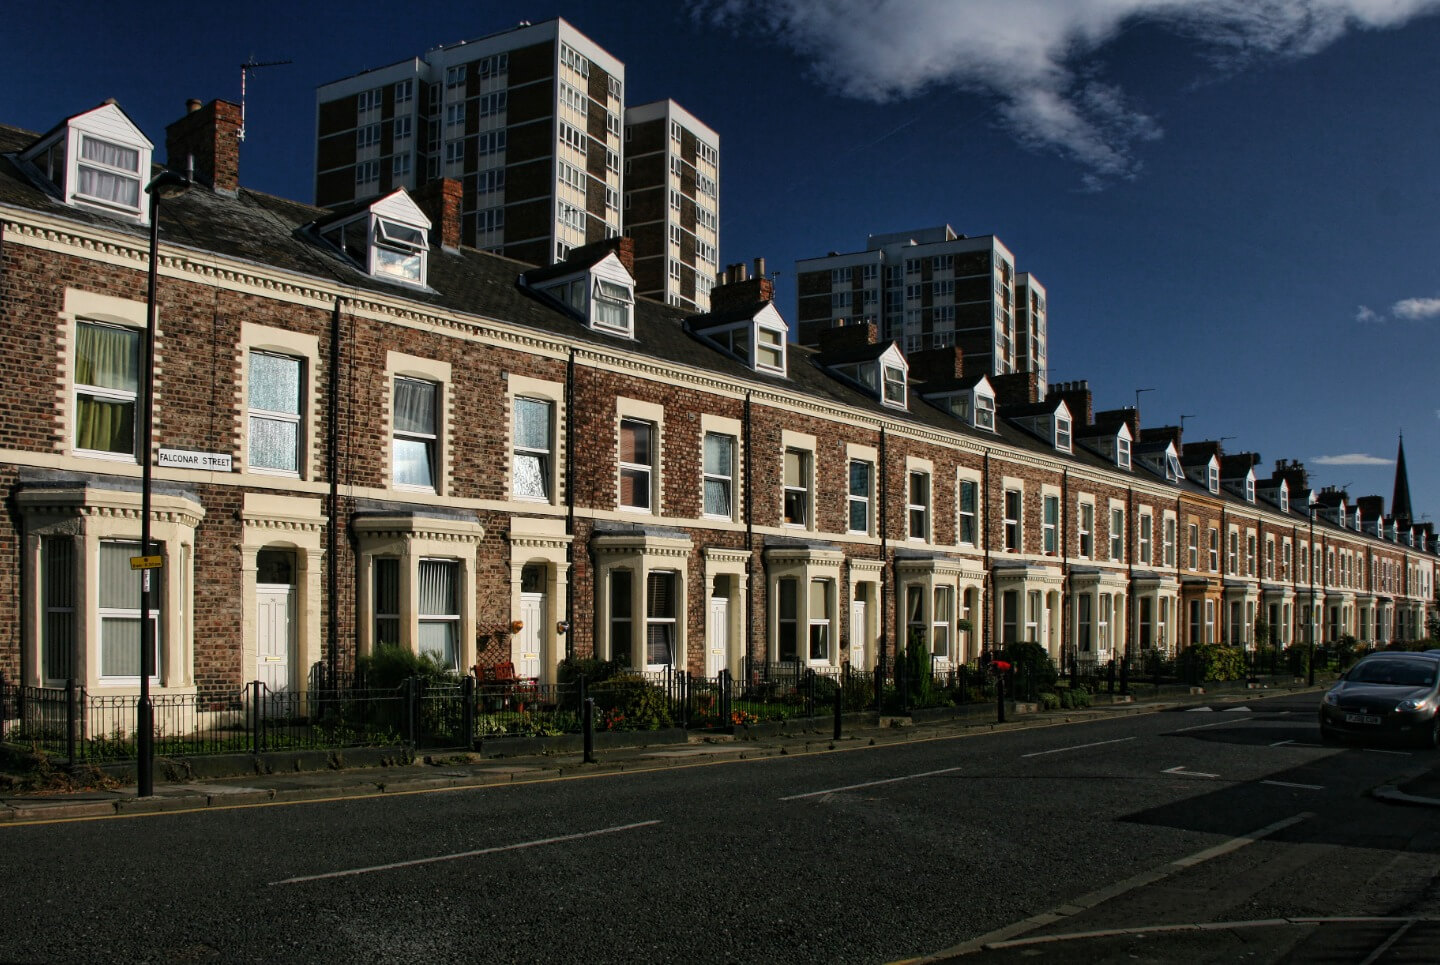 Student Accommodation in Sandyford, Newcastle - row of houses on Falconer Street